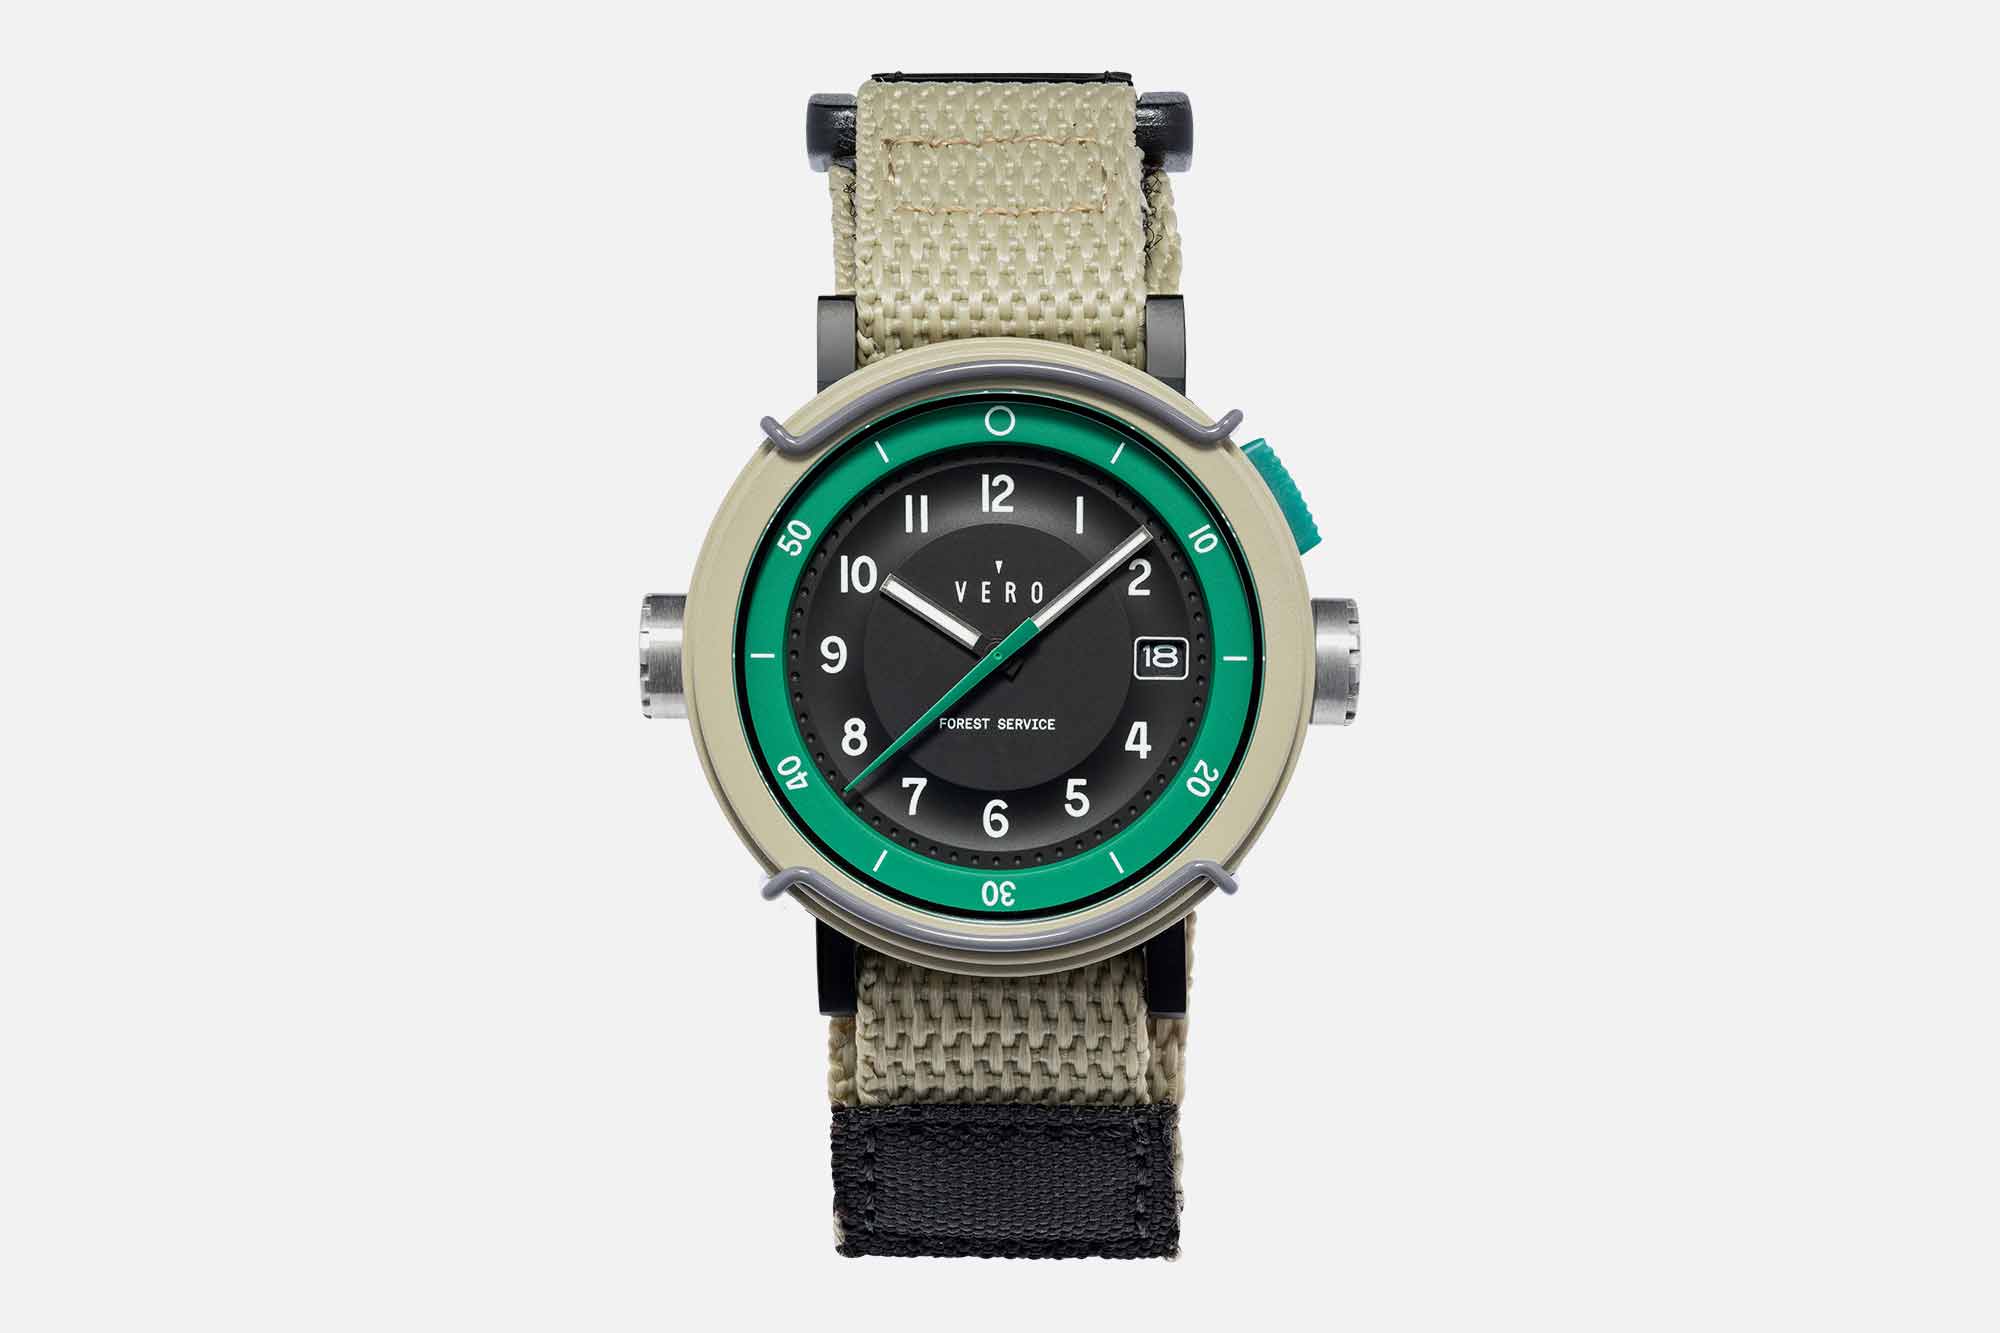 Vero Debuts a Collection of Officially Licensed USDA Forest Service Watches on the Workhorse Platform